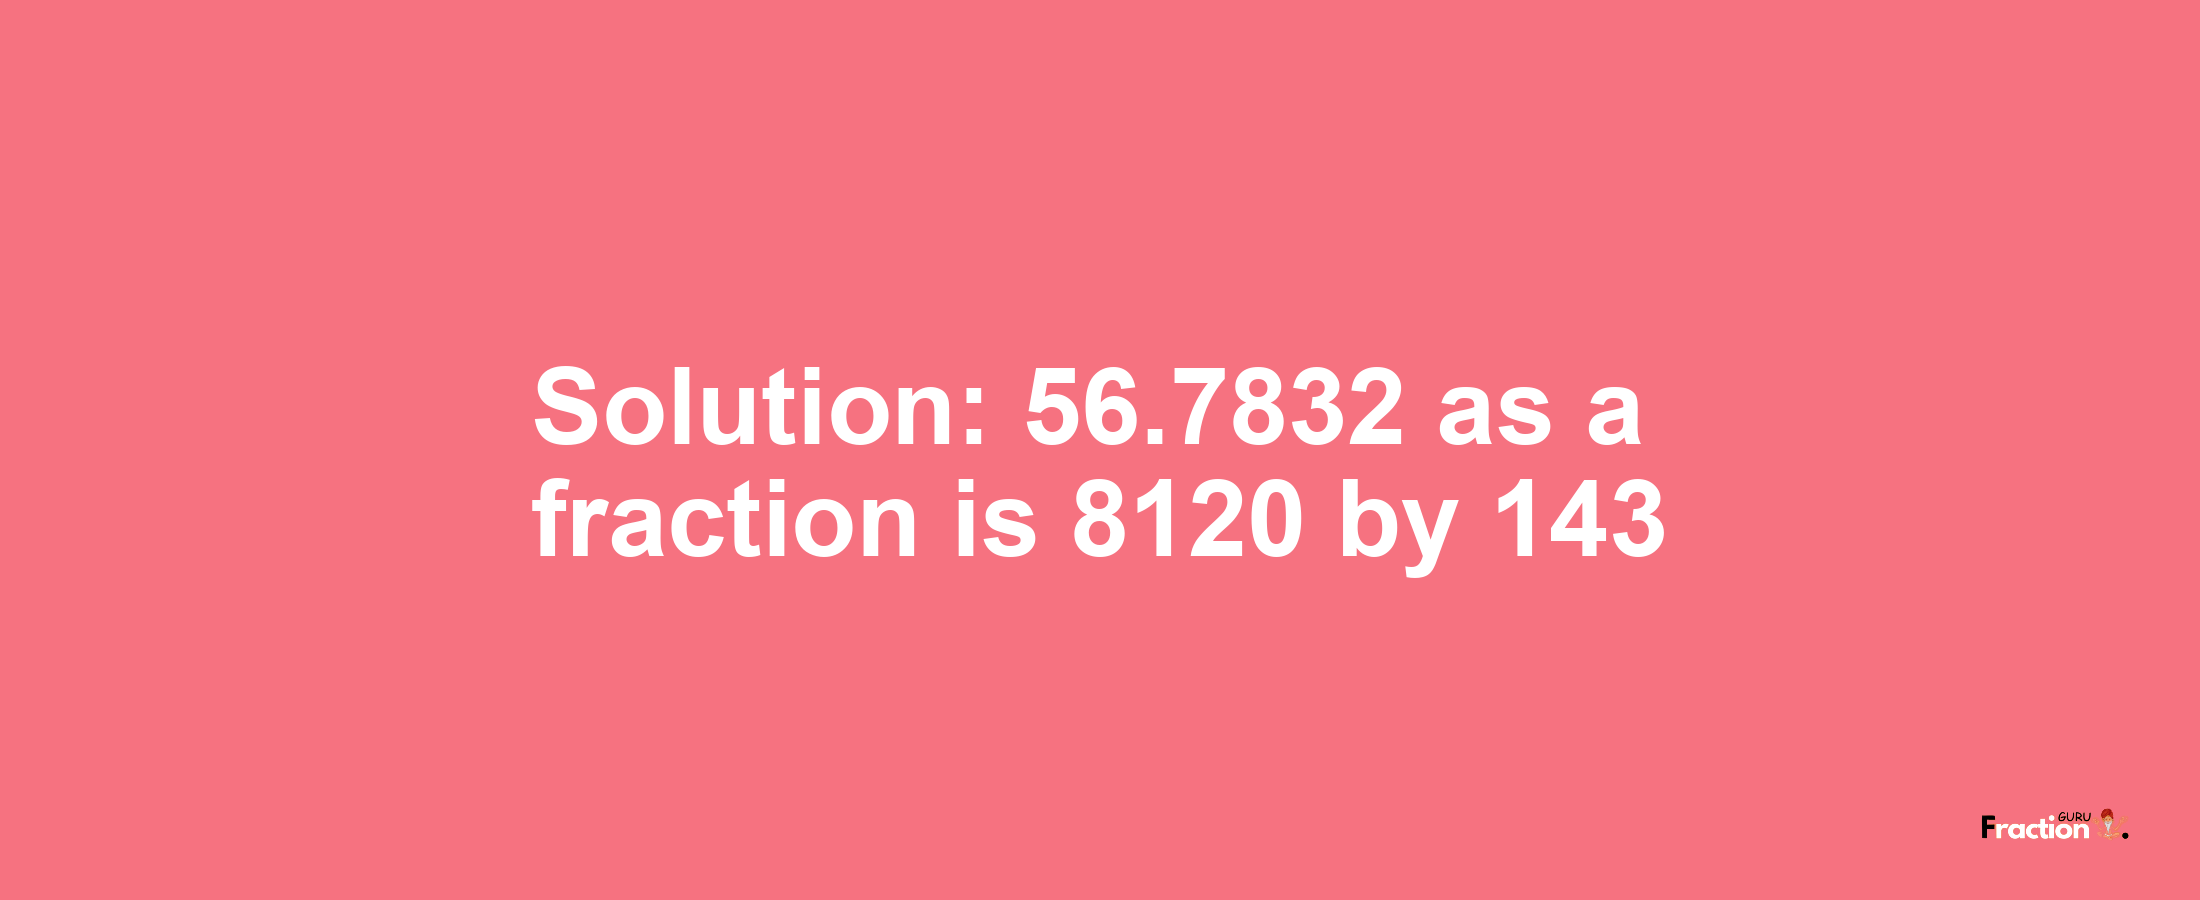 Solution:56.7832 as a fraction is 8120/143